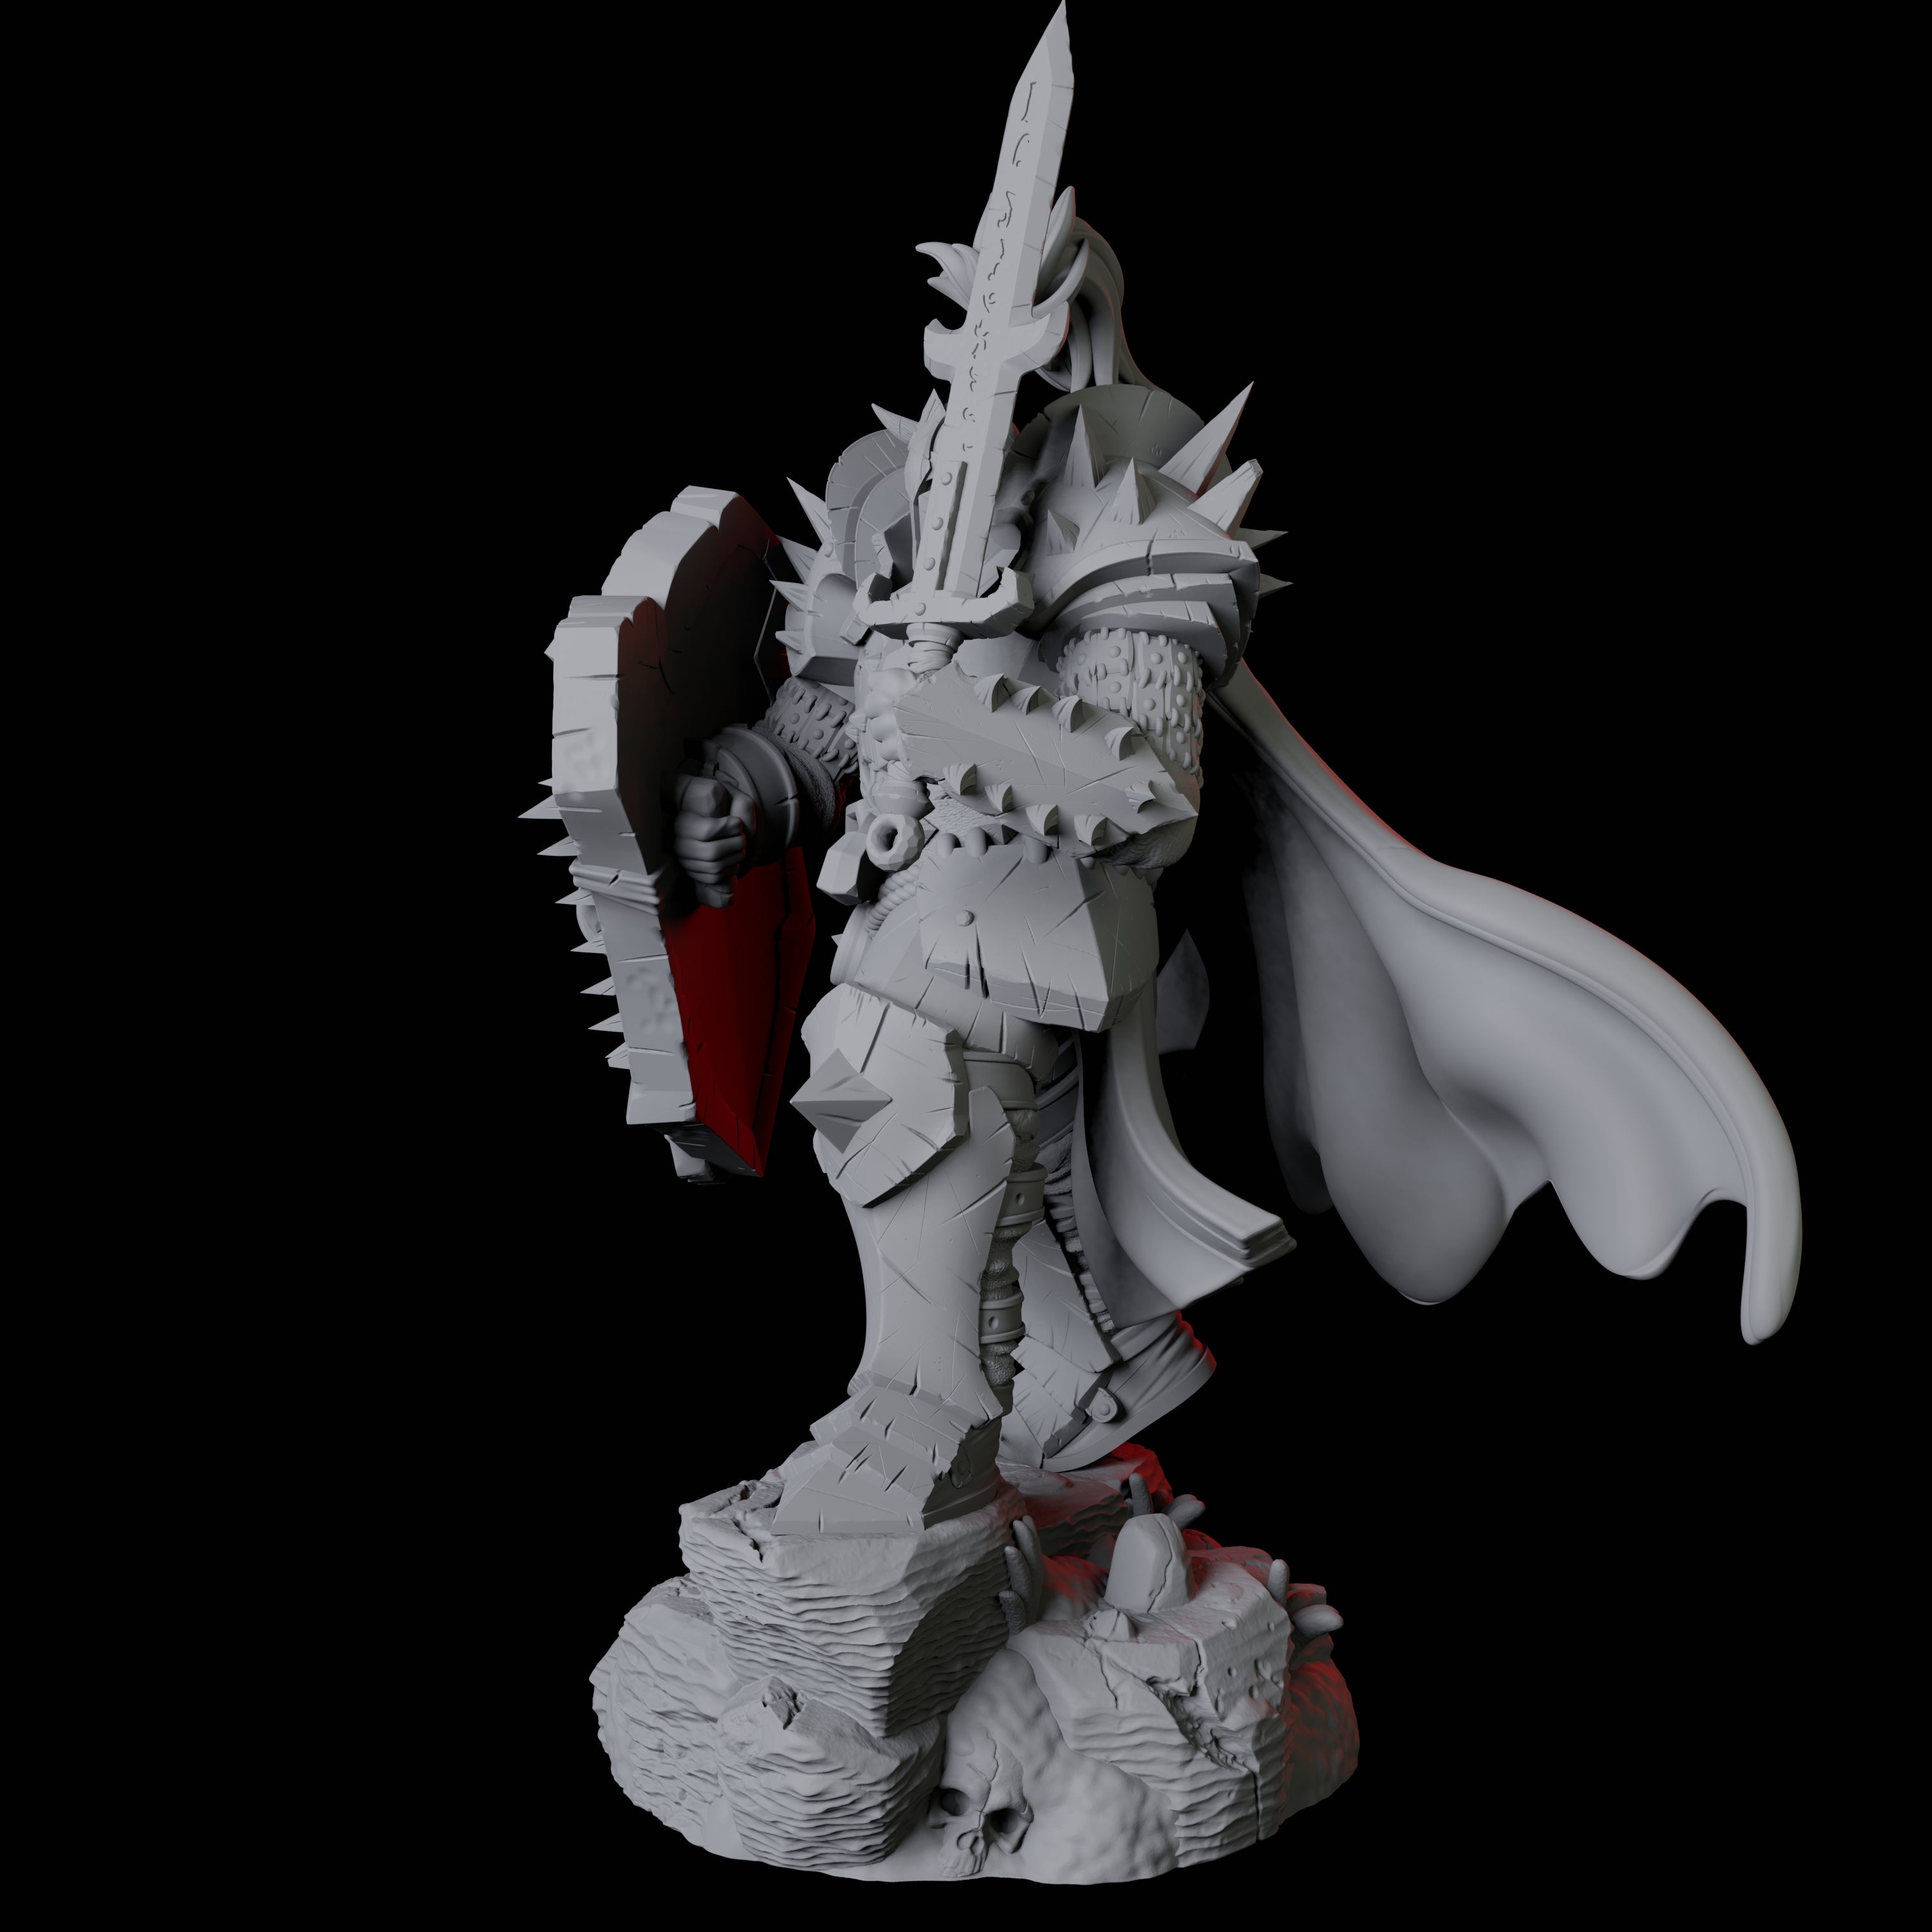 Hulking Armoured Barbarian C Miniature for Dungeons and Dragons, Pathfinder or other TTRPGs